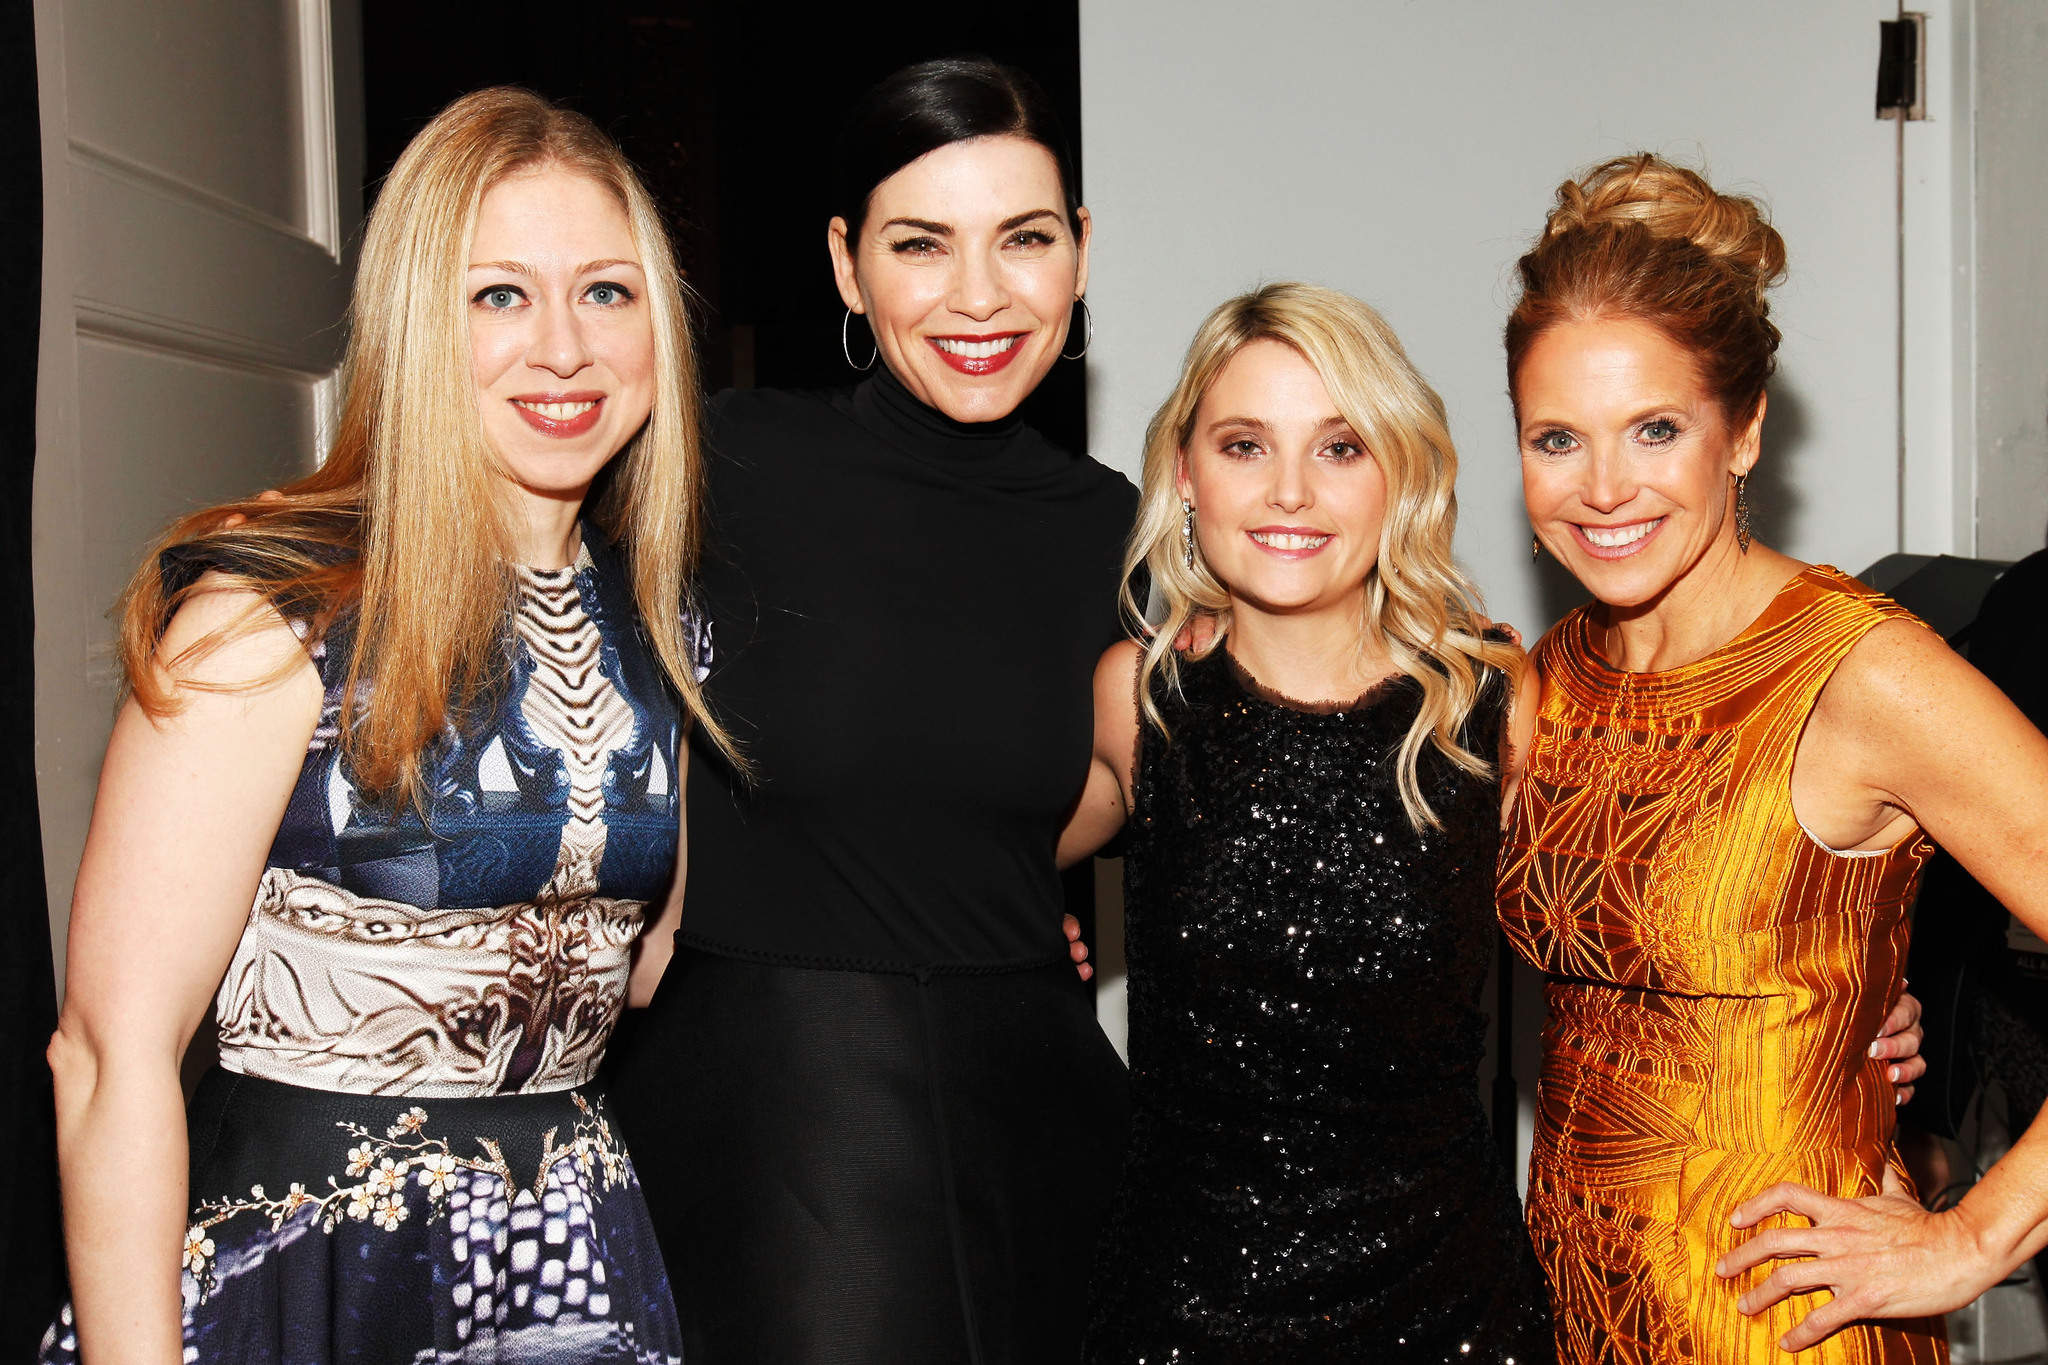 Julianna Margulies, Chelsea Clinton and Katie Couric